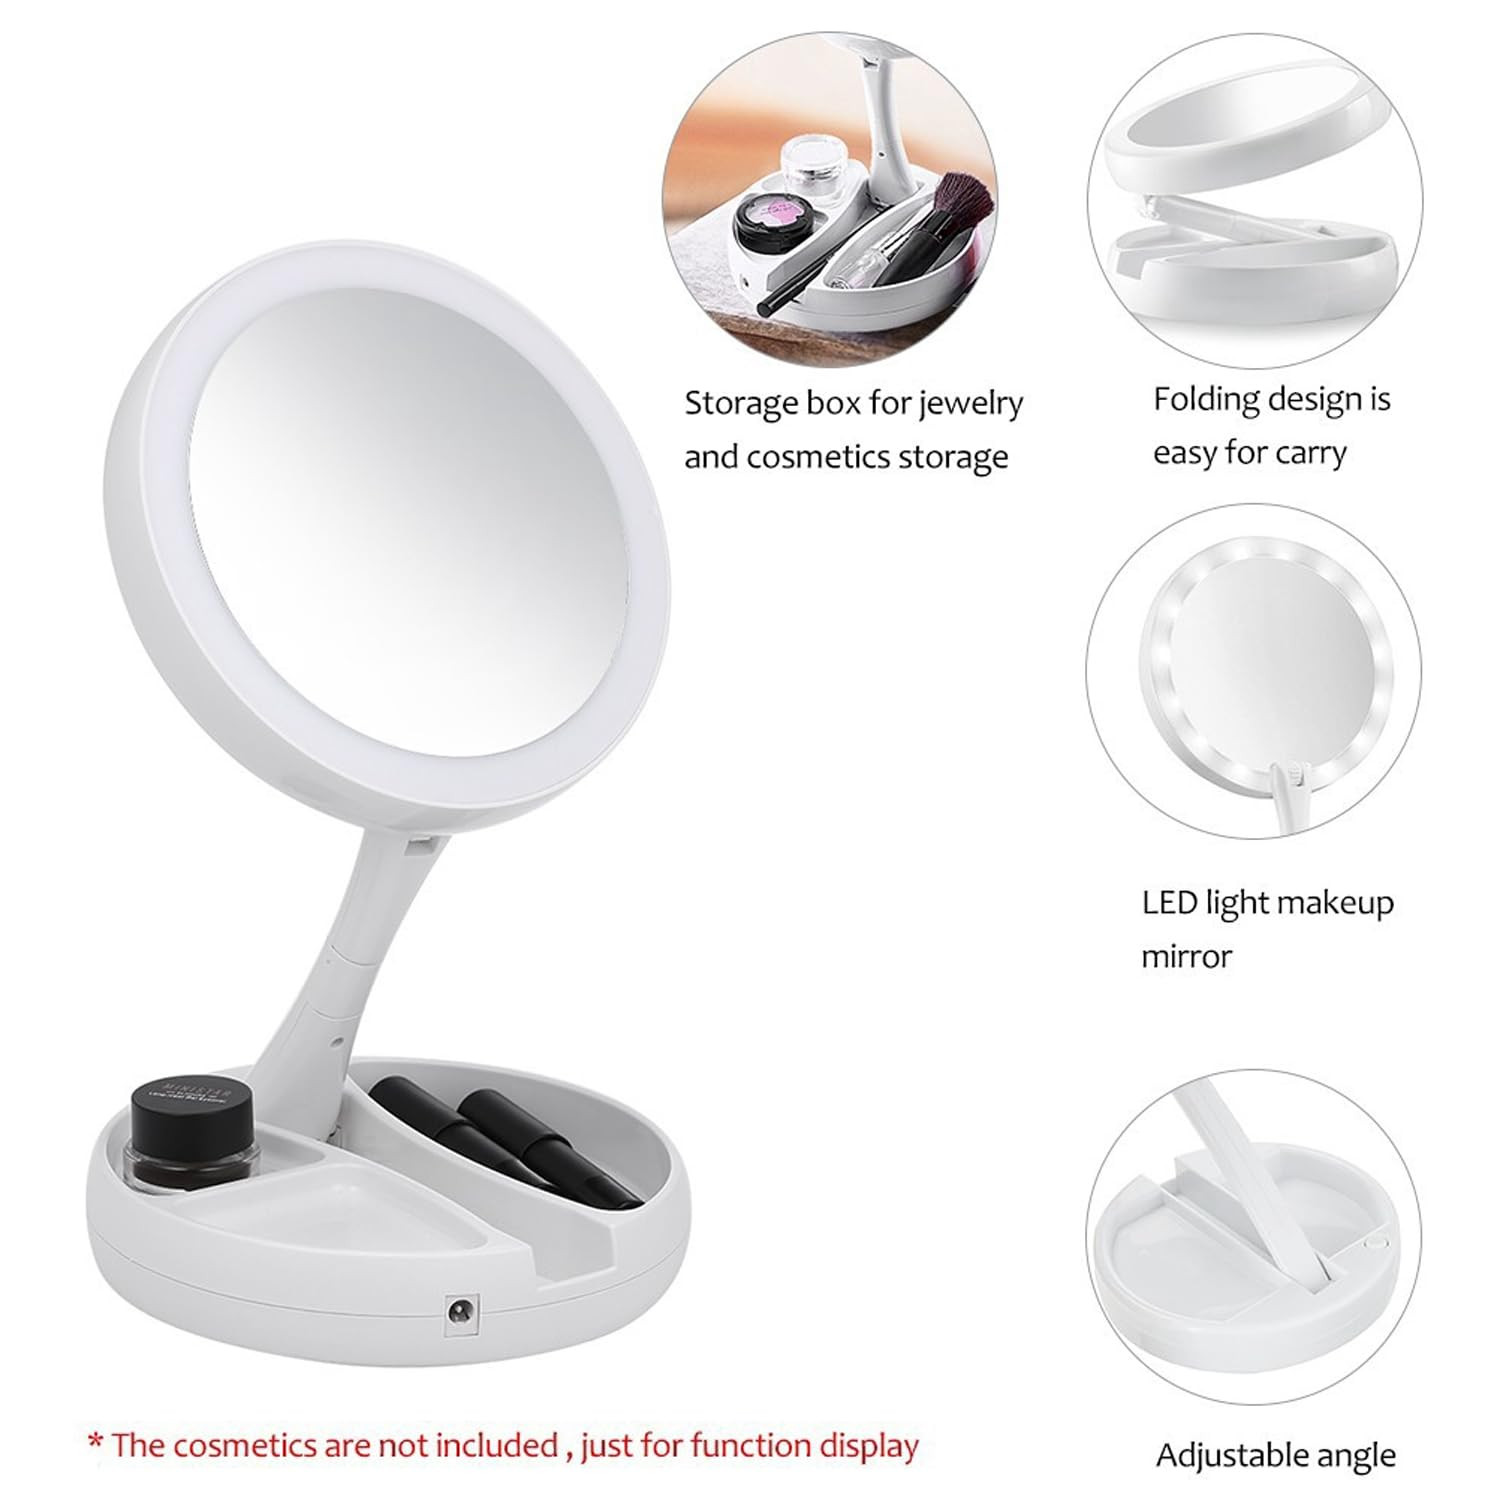 Kuber Industires Foldable Makeup Mirror with LED Light|Mirror for Table Top, Vanity, Desk|Battery Operated & USB Port(White)